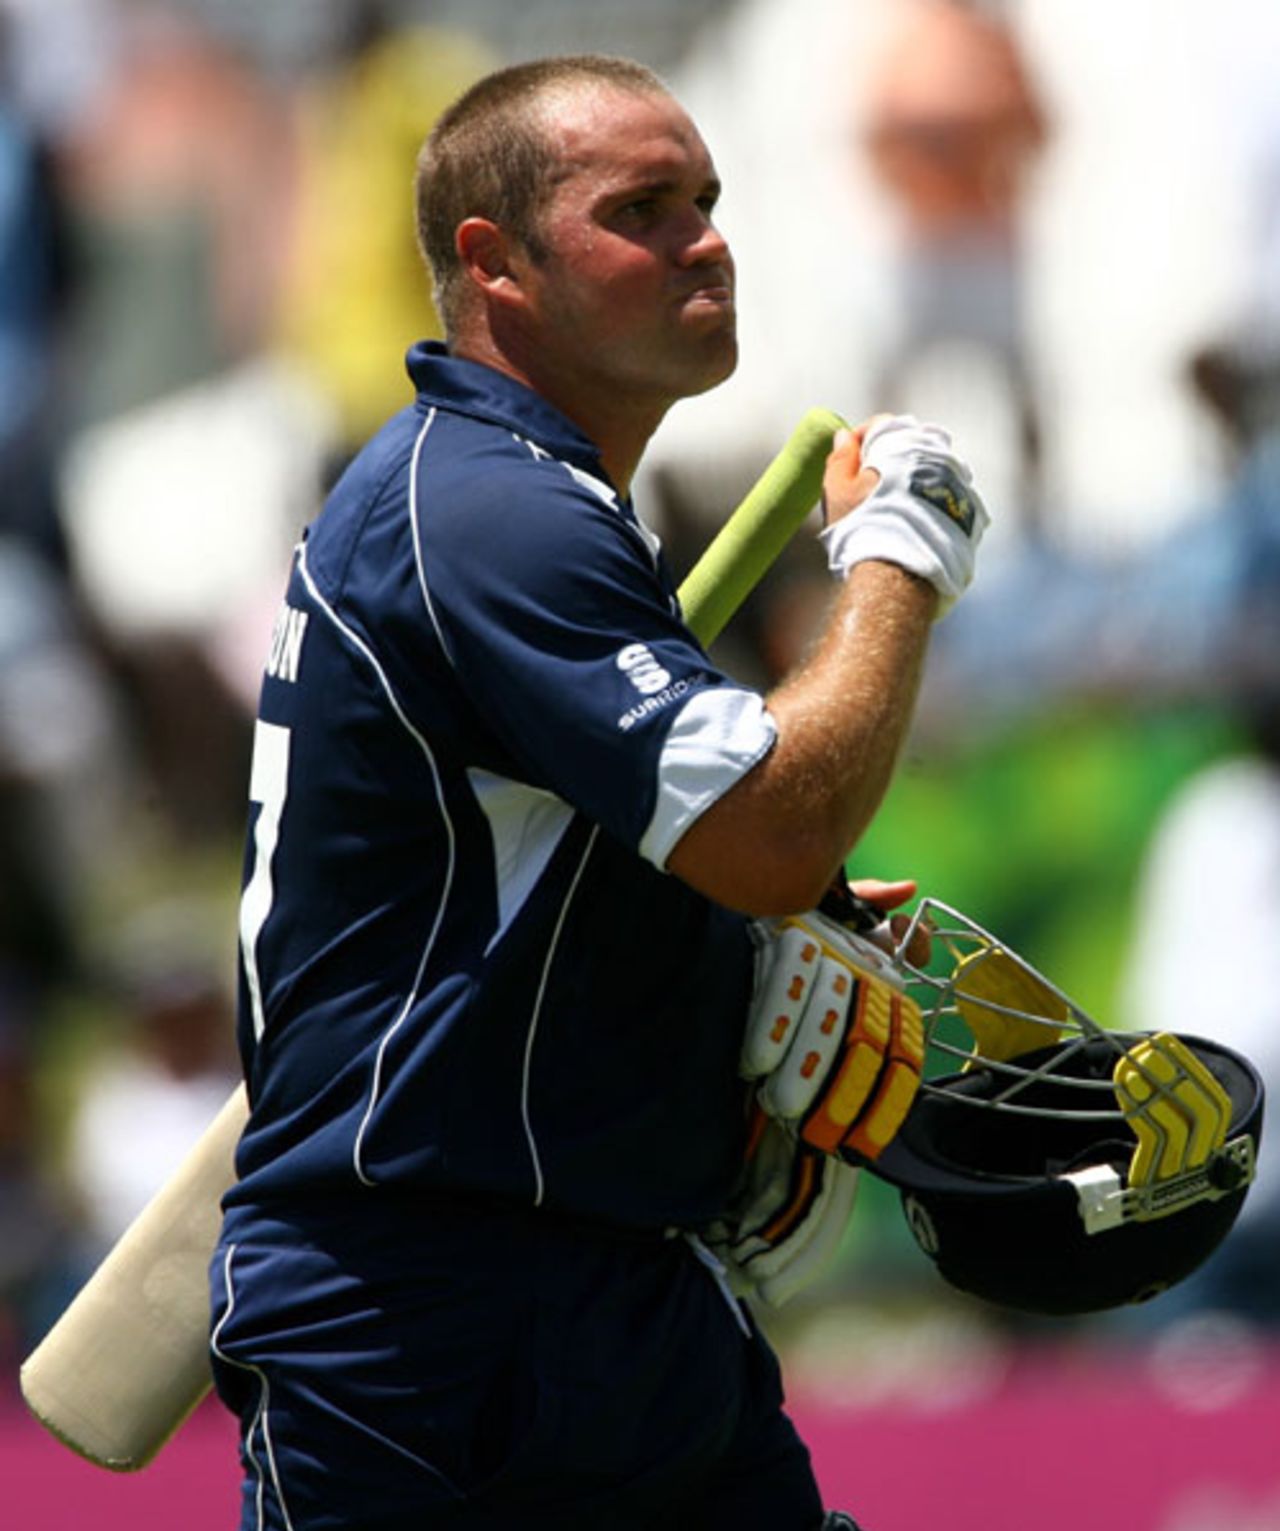 Ryan Watson was batting well, but an ill-judged run cut his innings short, Scotland v South Africa, Group A, St Kitts, March 20, 2007